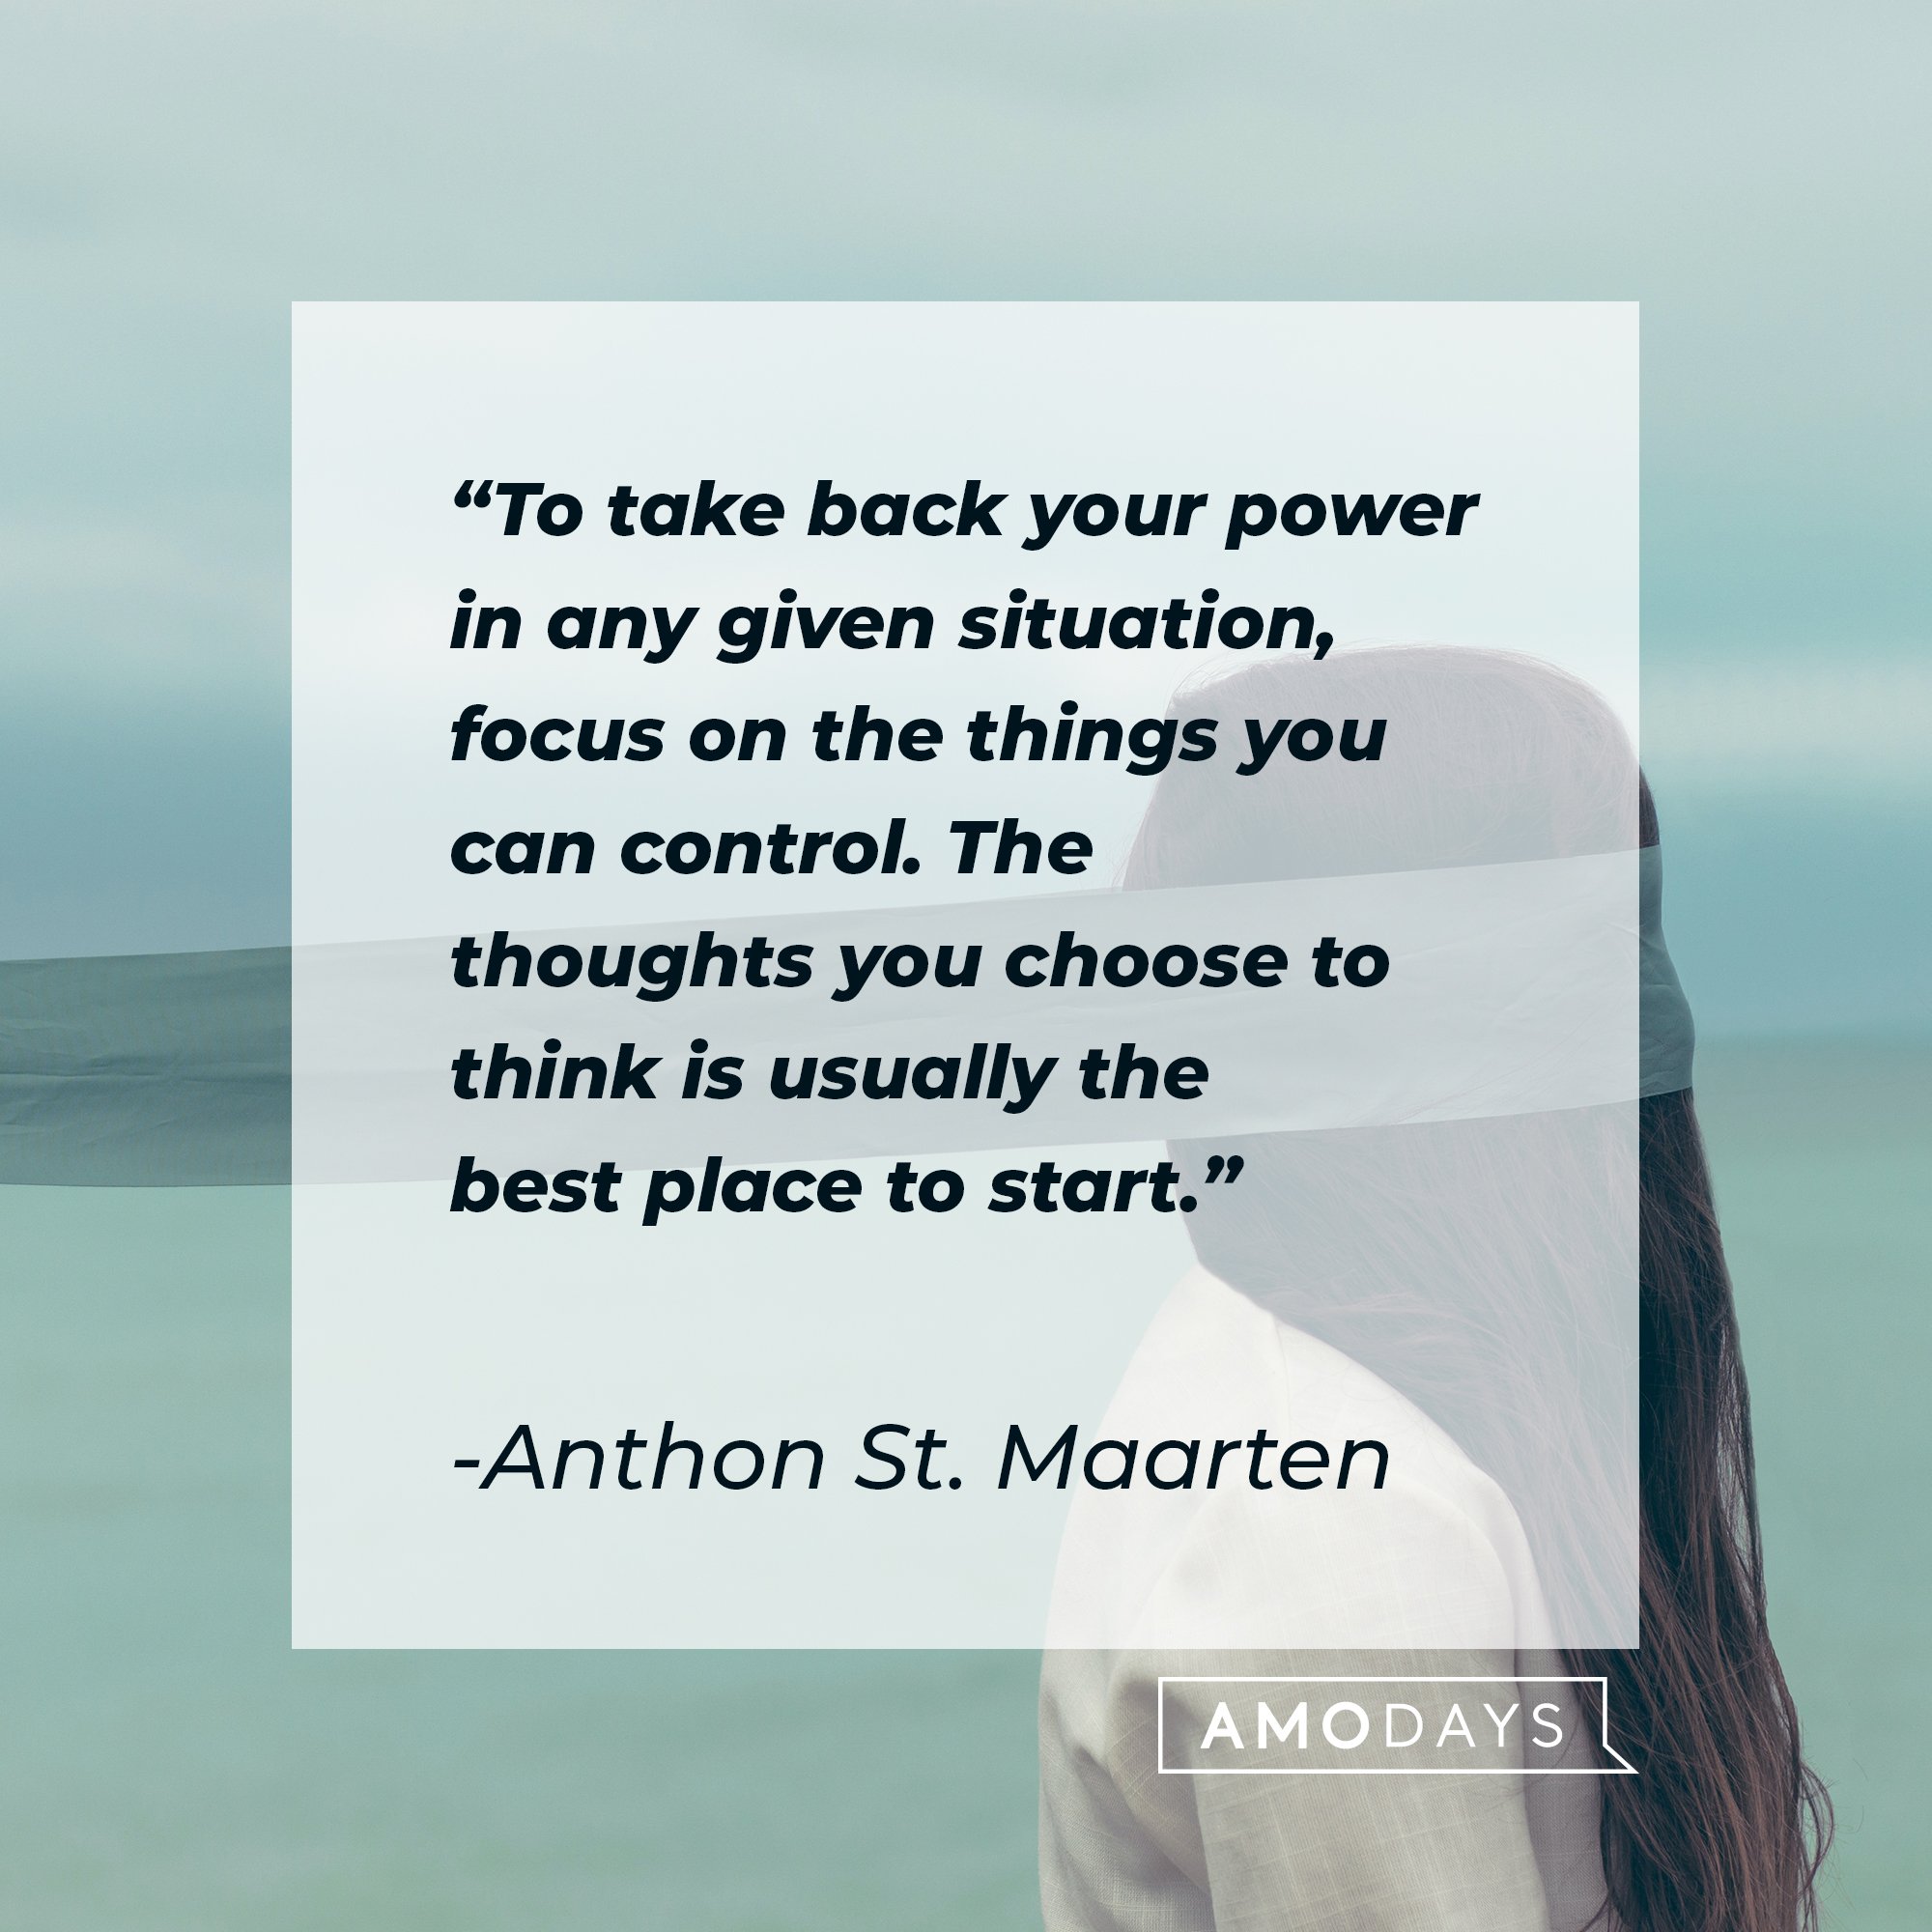 Anthon St. Maarten's quote: "To take back your power in any given situation, focus on the things you can control. The thoughts you choose to think is usually the best place to start." | Image: AmoDays